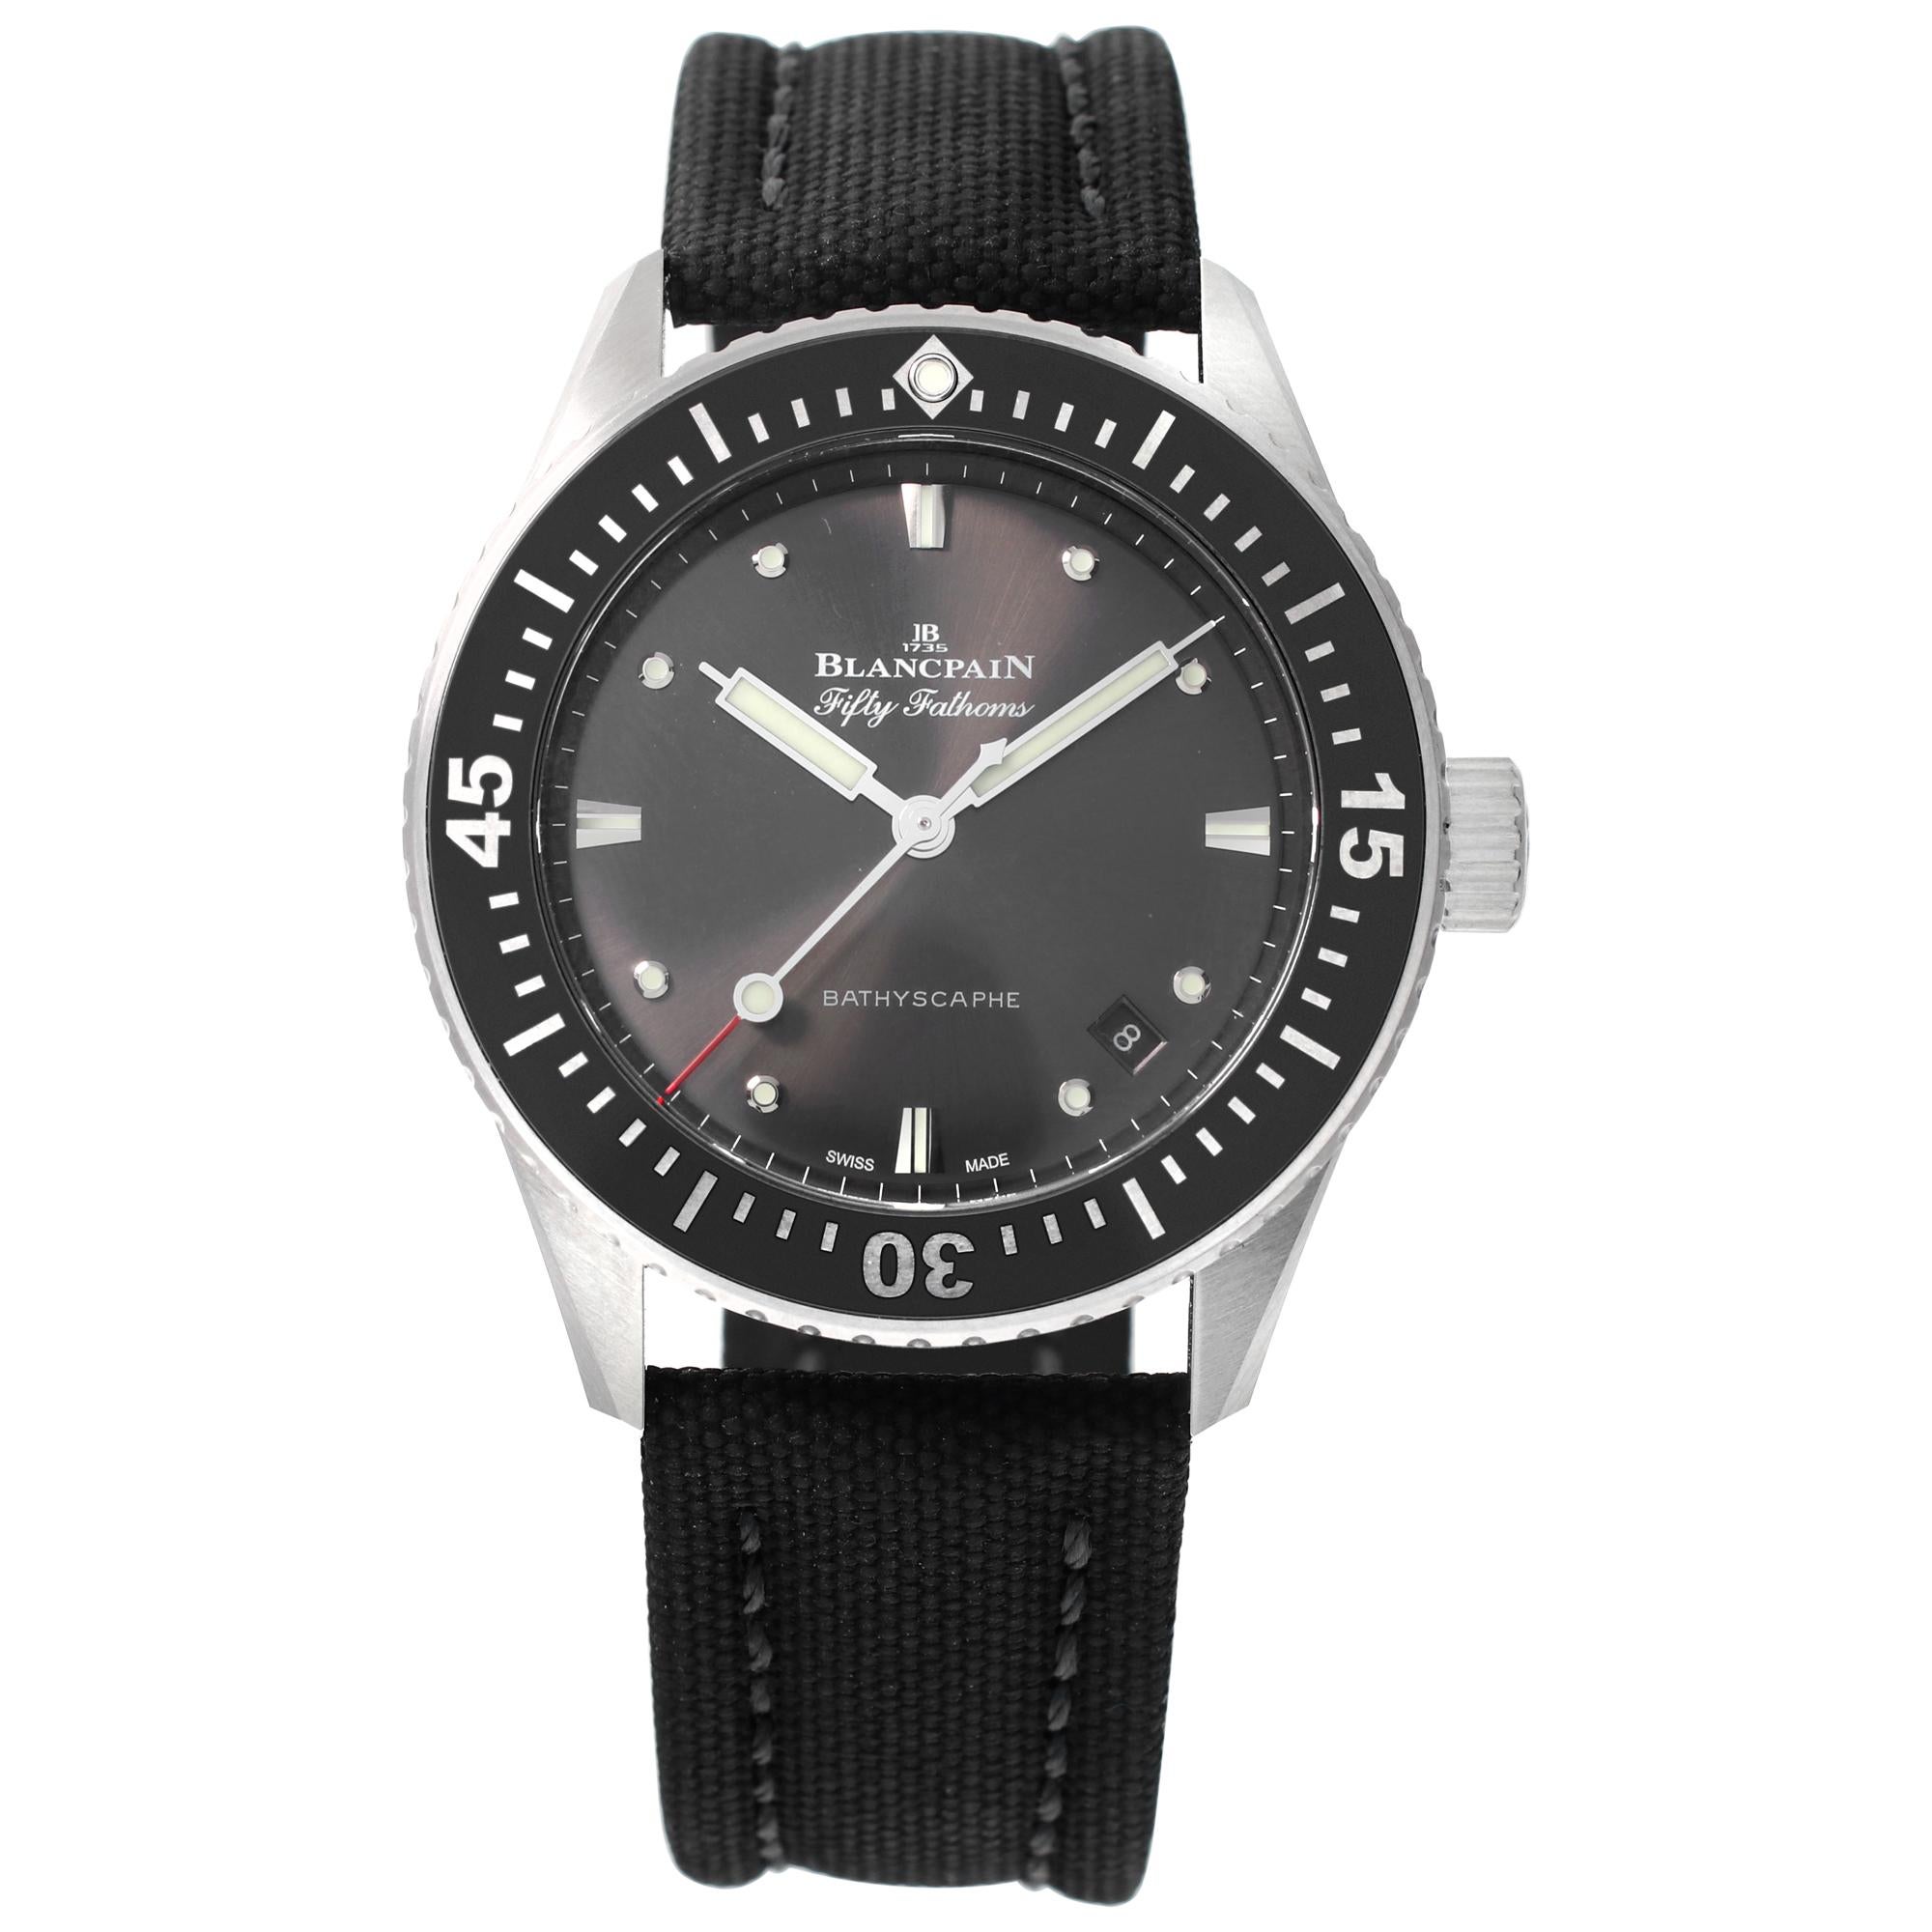 Blancpain Fifty Fathoms stainless steel Automatic Wristwatch Ref 5100B 1110 B52A For Sale